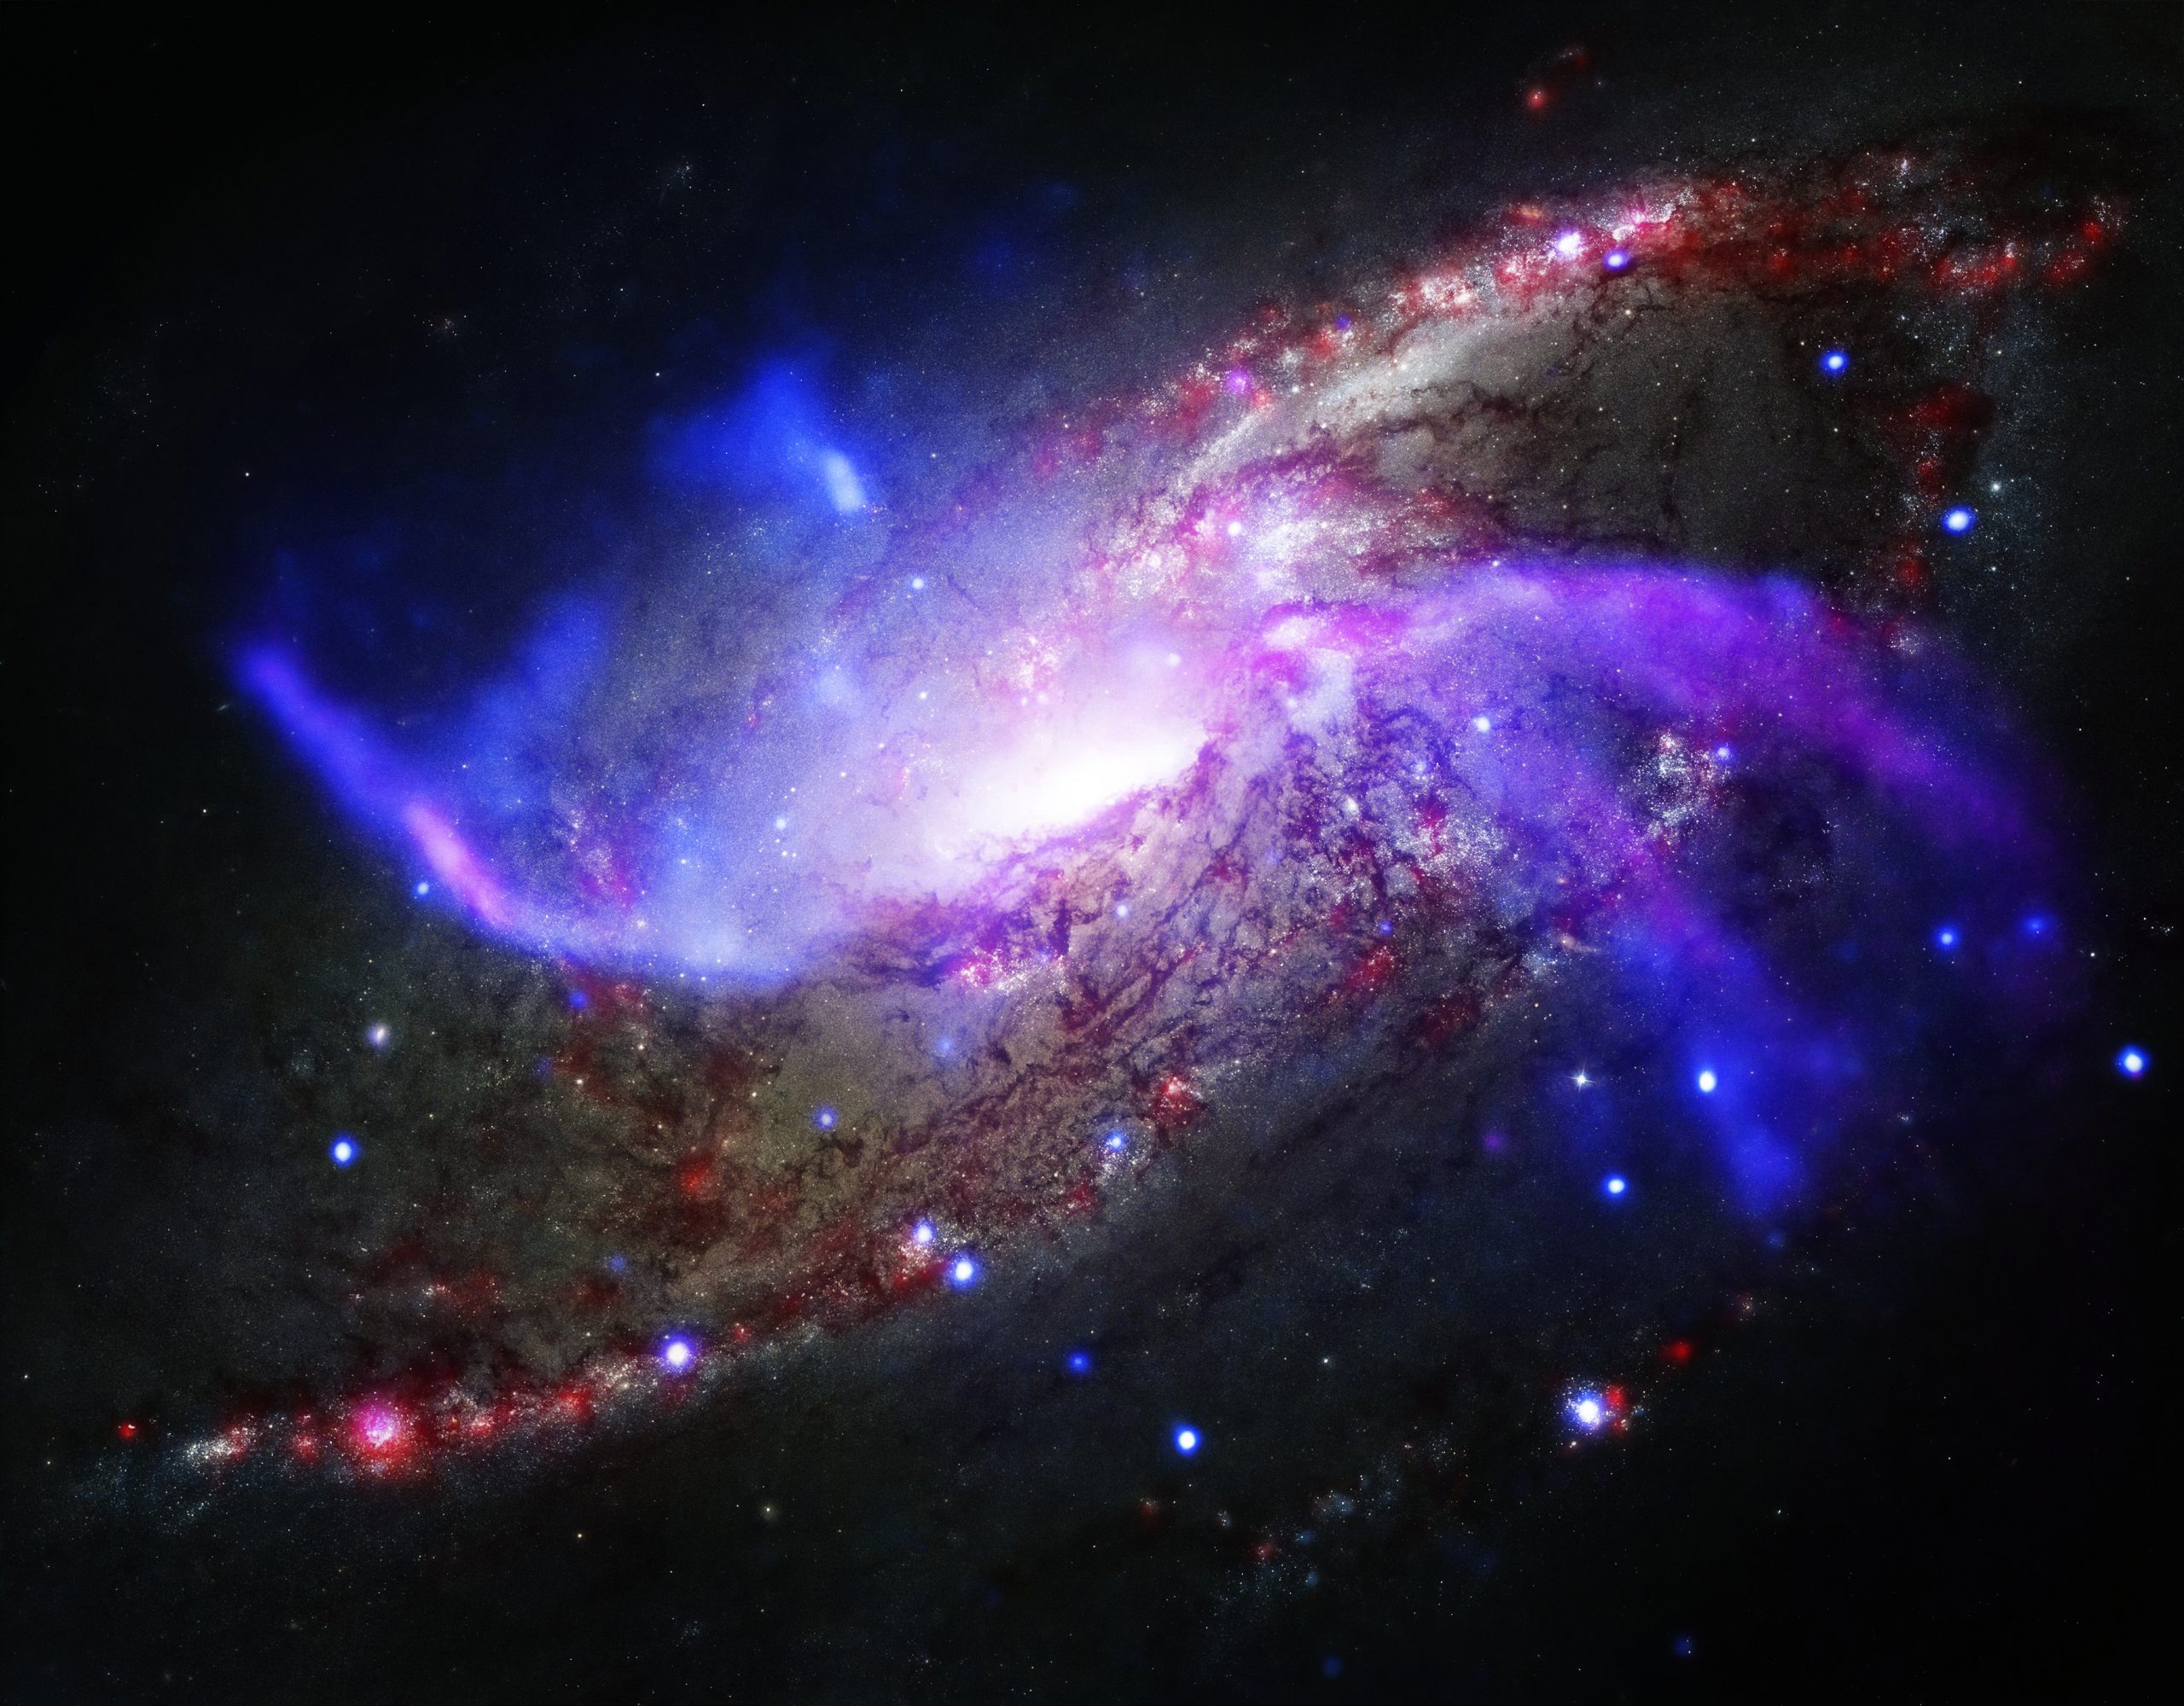 An illustration showing a galaxy with spiral arms. Depositphotos.